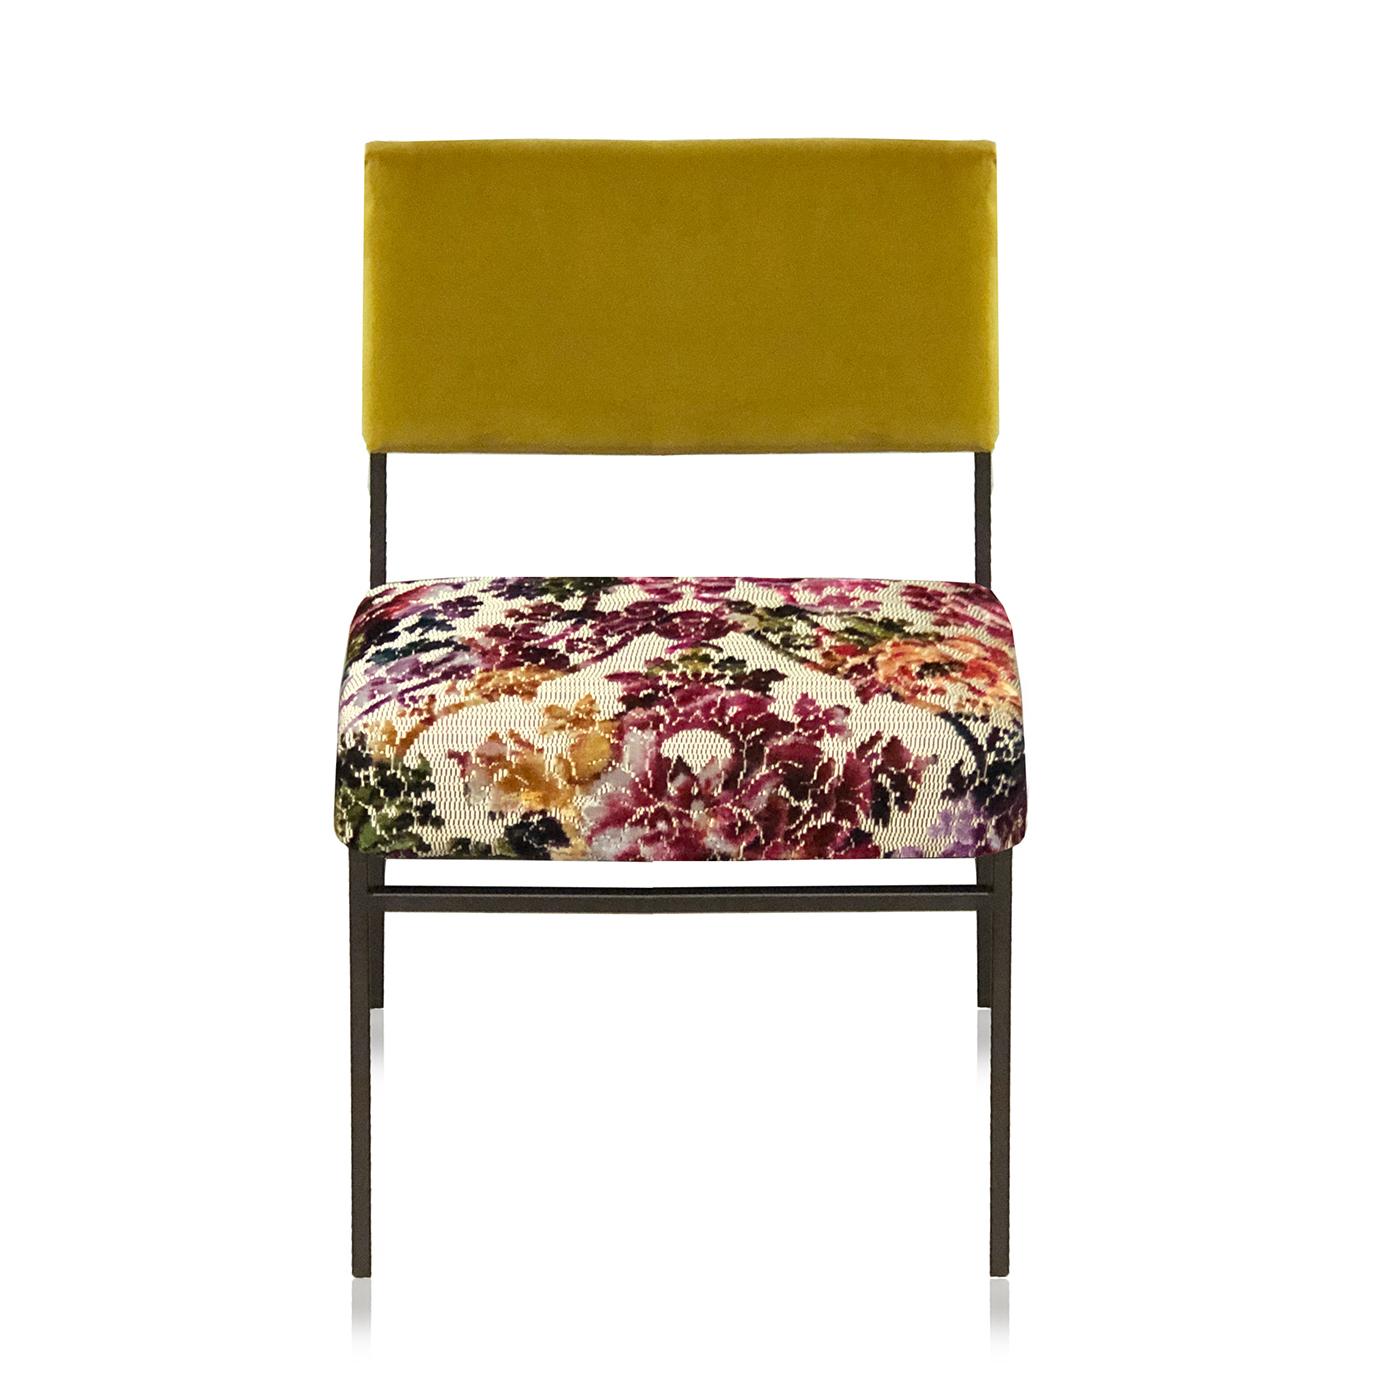 Featuring a brushed iron frame complemented by a padded seat and back with a chic cover in cotton velvet, the Aurea Yellow Velvet Chair by CtrlZak and Davide Barzaghi is perfect for relaxing into a great conversation. Offering a 50s retro appeal,